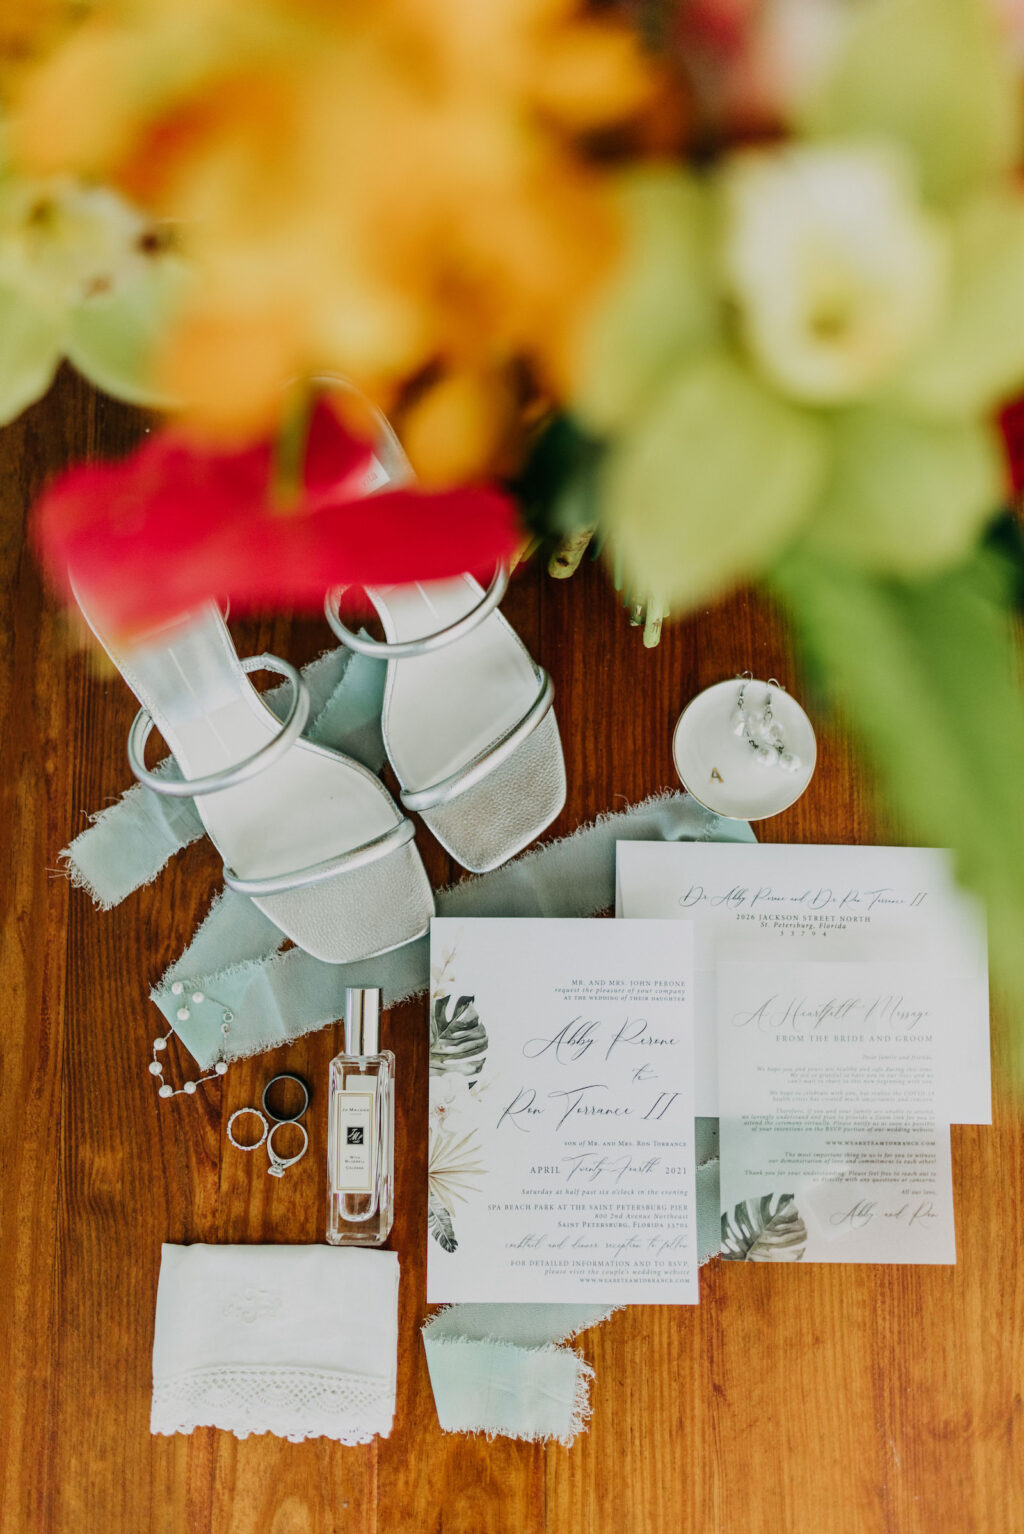 Tropical Green Palm Leaves and White Wedding Invitation Suite, Bridal Accessories | Tampa Bay Wedding Photographer Amber McWhorter Photography